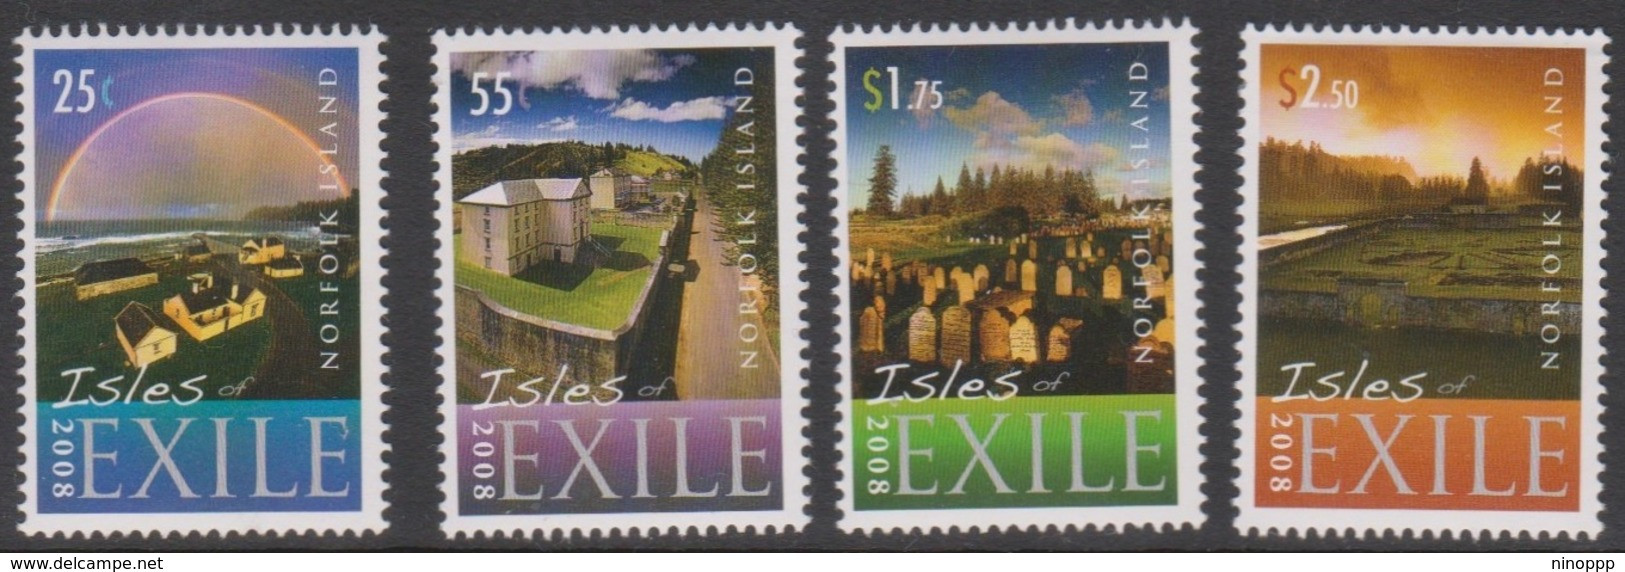 Norfolk Island ASC 1031-1034 2008 Isles Of Exile, Mint Never Hinged - Norfolkinsel